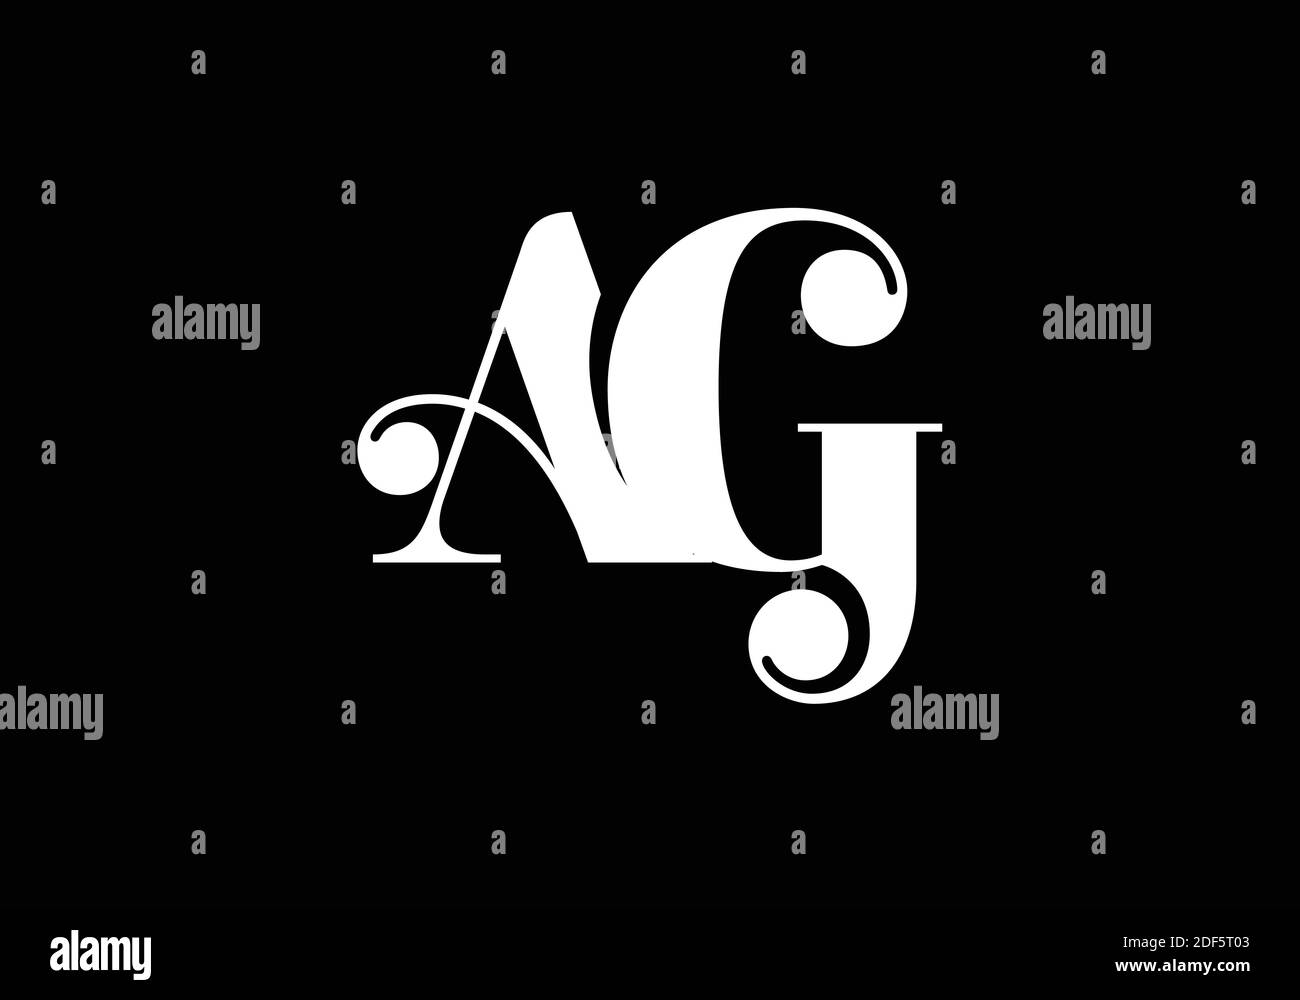 Initial Monogram Letter A G Logo Design Vector Template. Graphic Alphabet Symbol for Corporate Business Identity Stock Vector